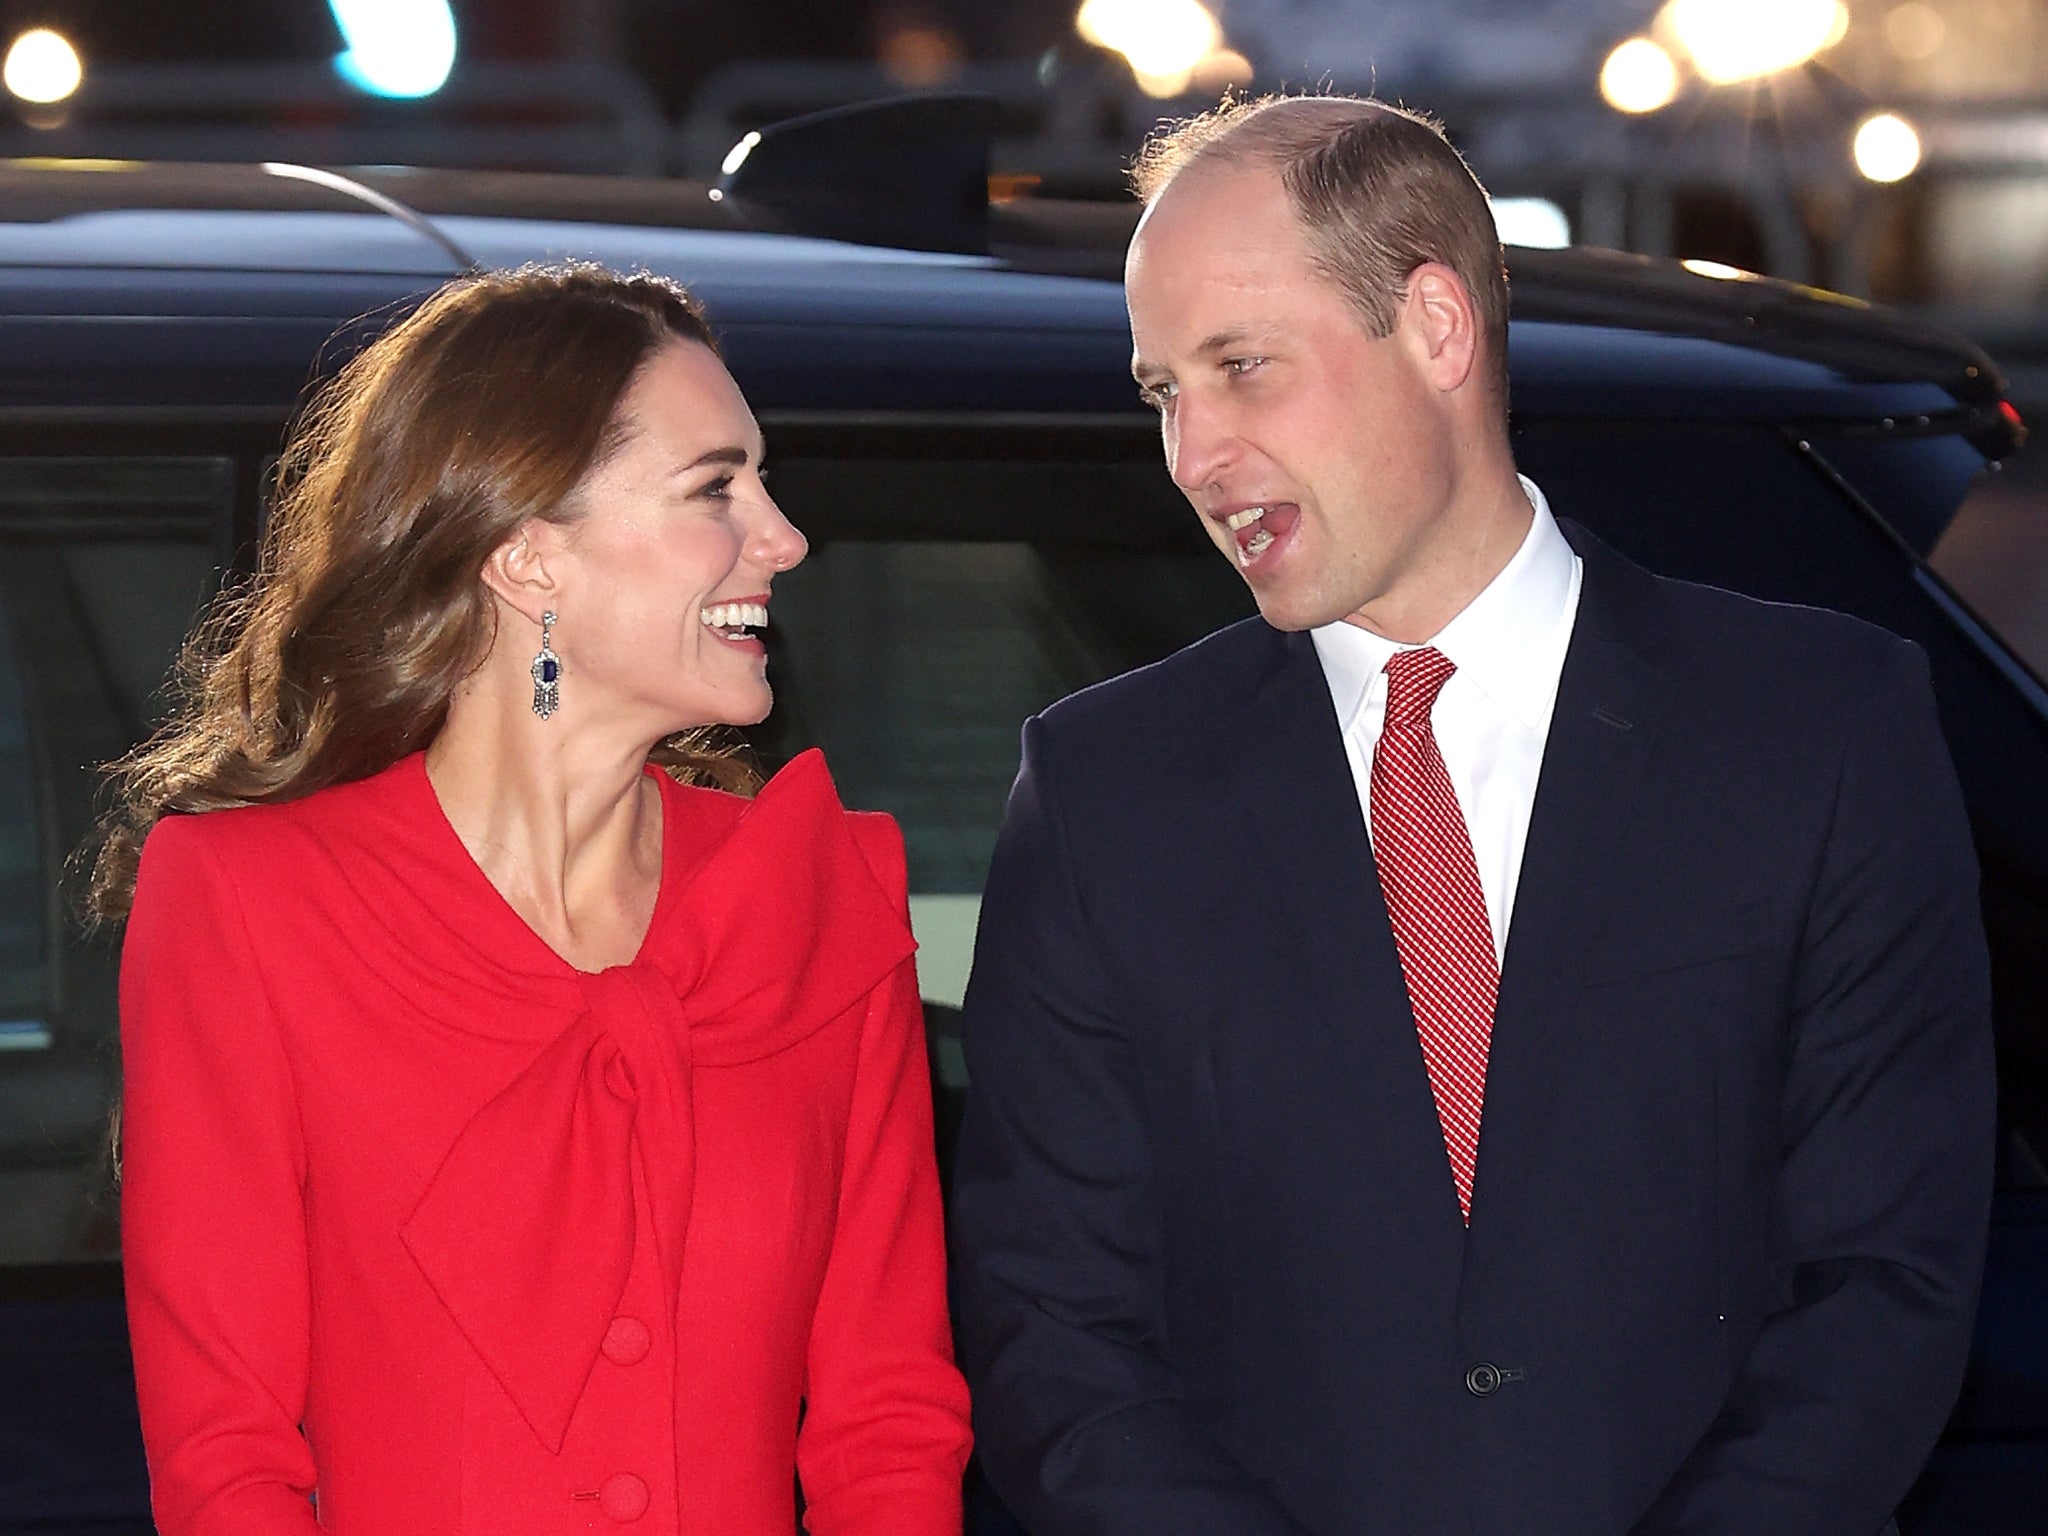 Kate Middleton and Prince William arrive at the “Together at Christmas” community carol service at Westminster Abbey